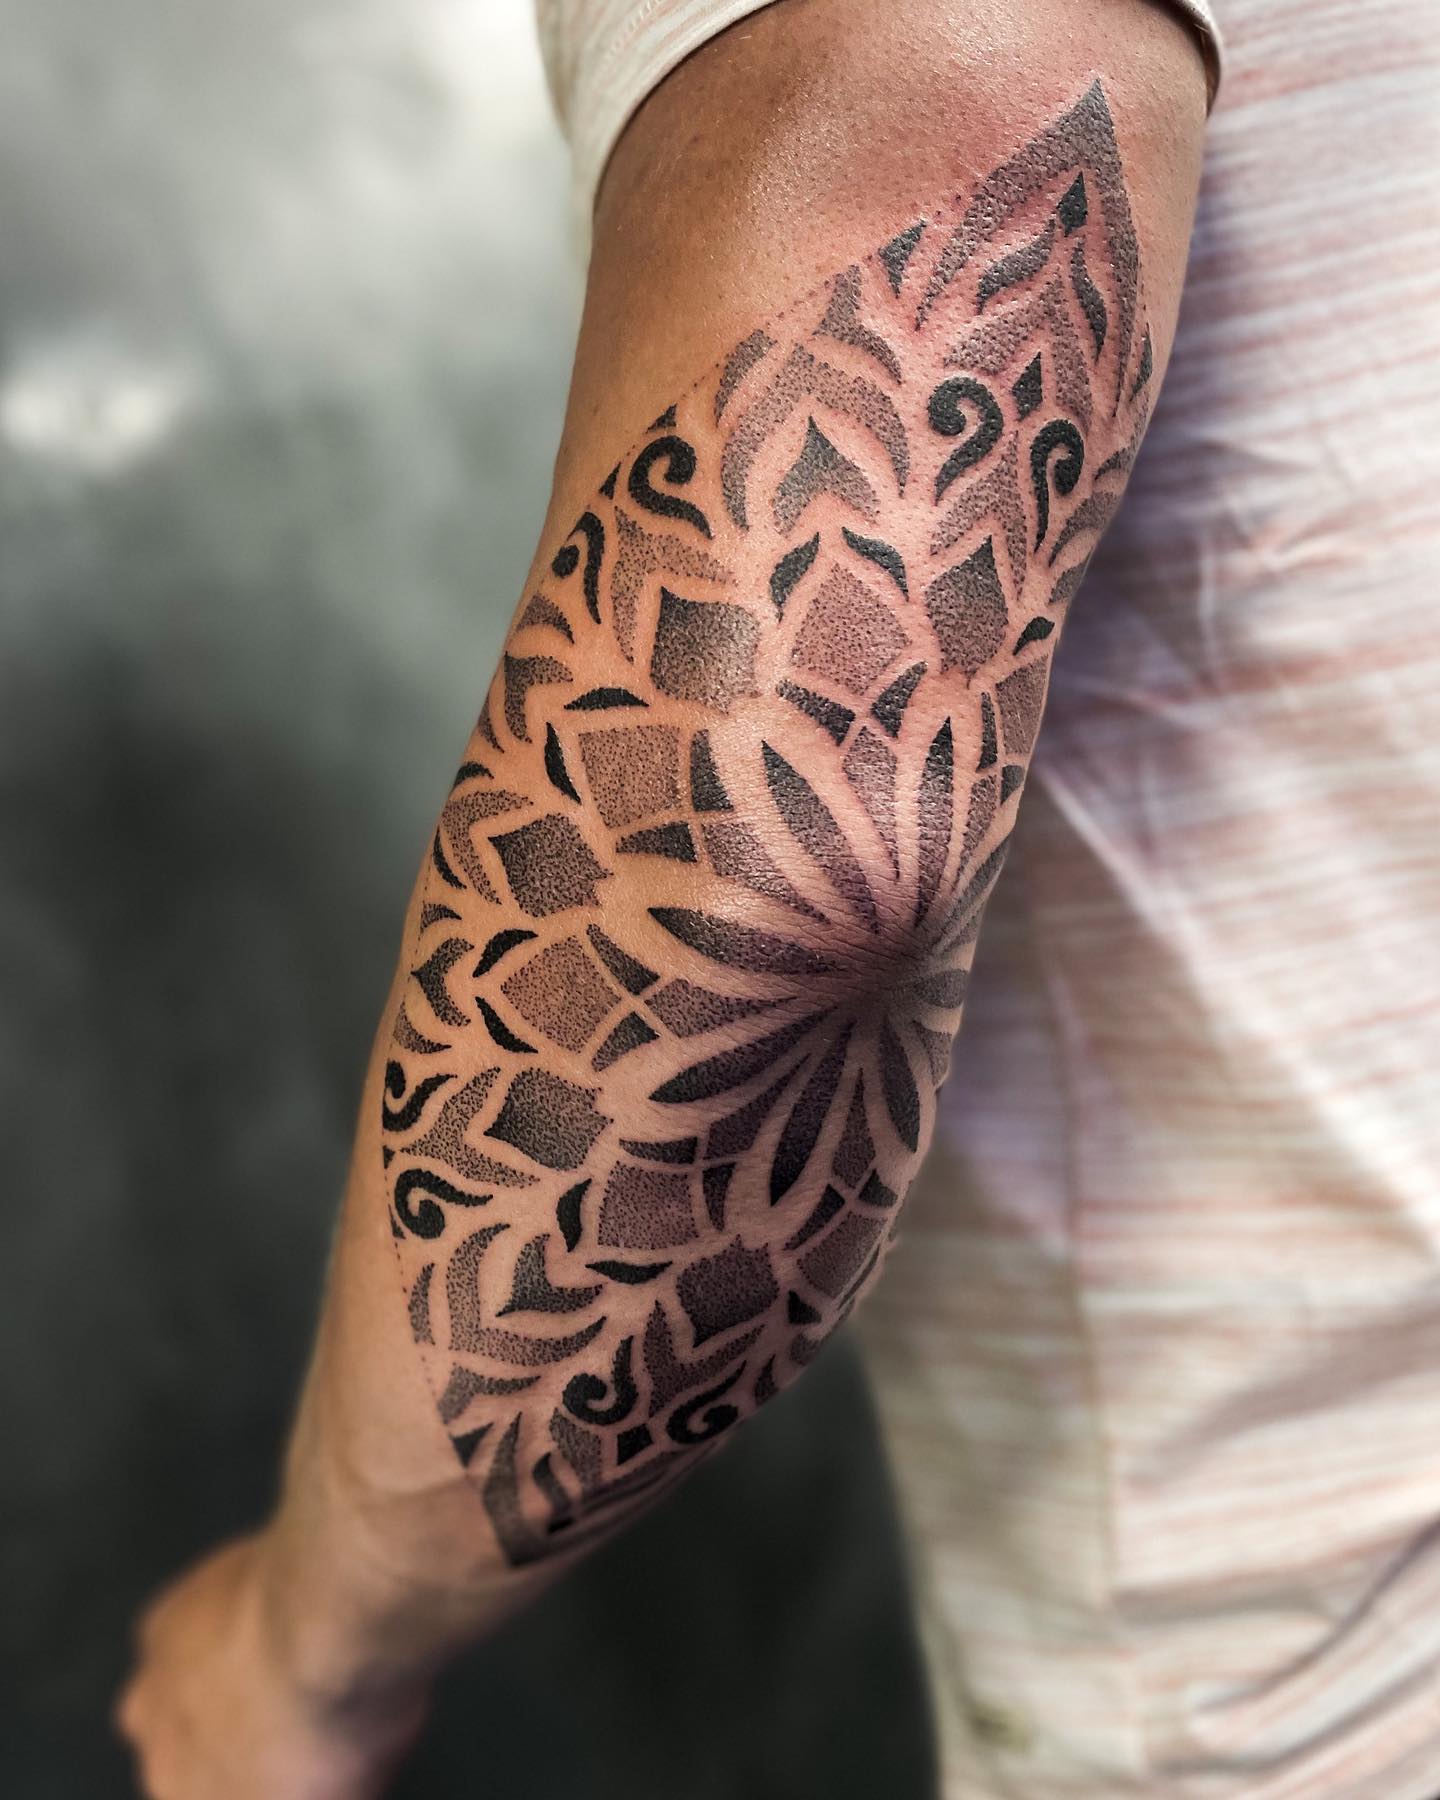 Black shaded mandalas and this tattoo will take some time to complete. If you like big and bold, this is it! Make sure that you have 4-5 hours to spare since this is how much it is going to take to do it.